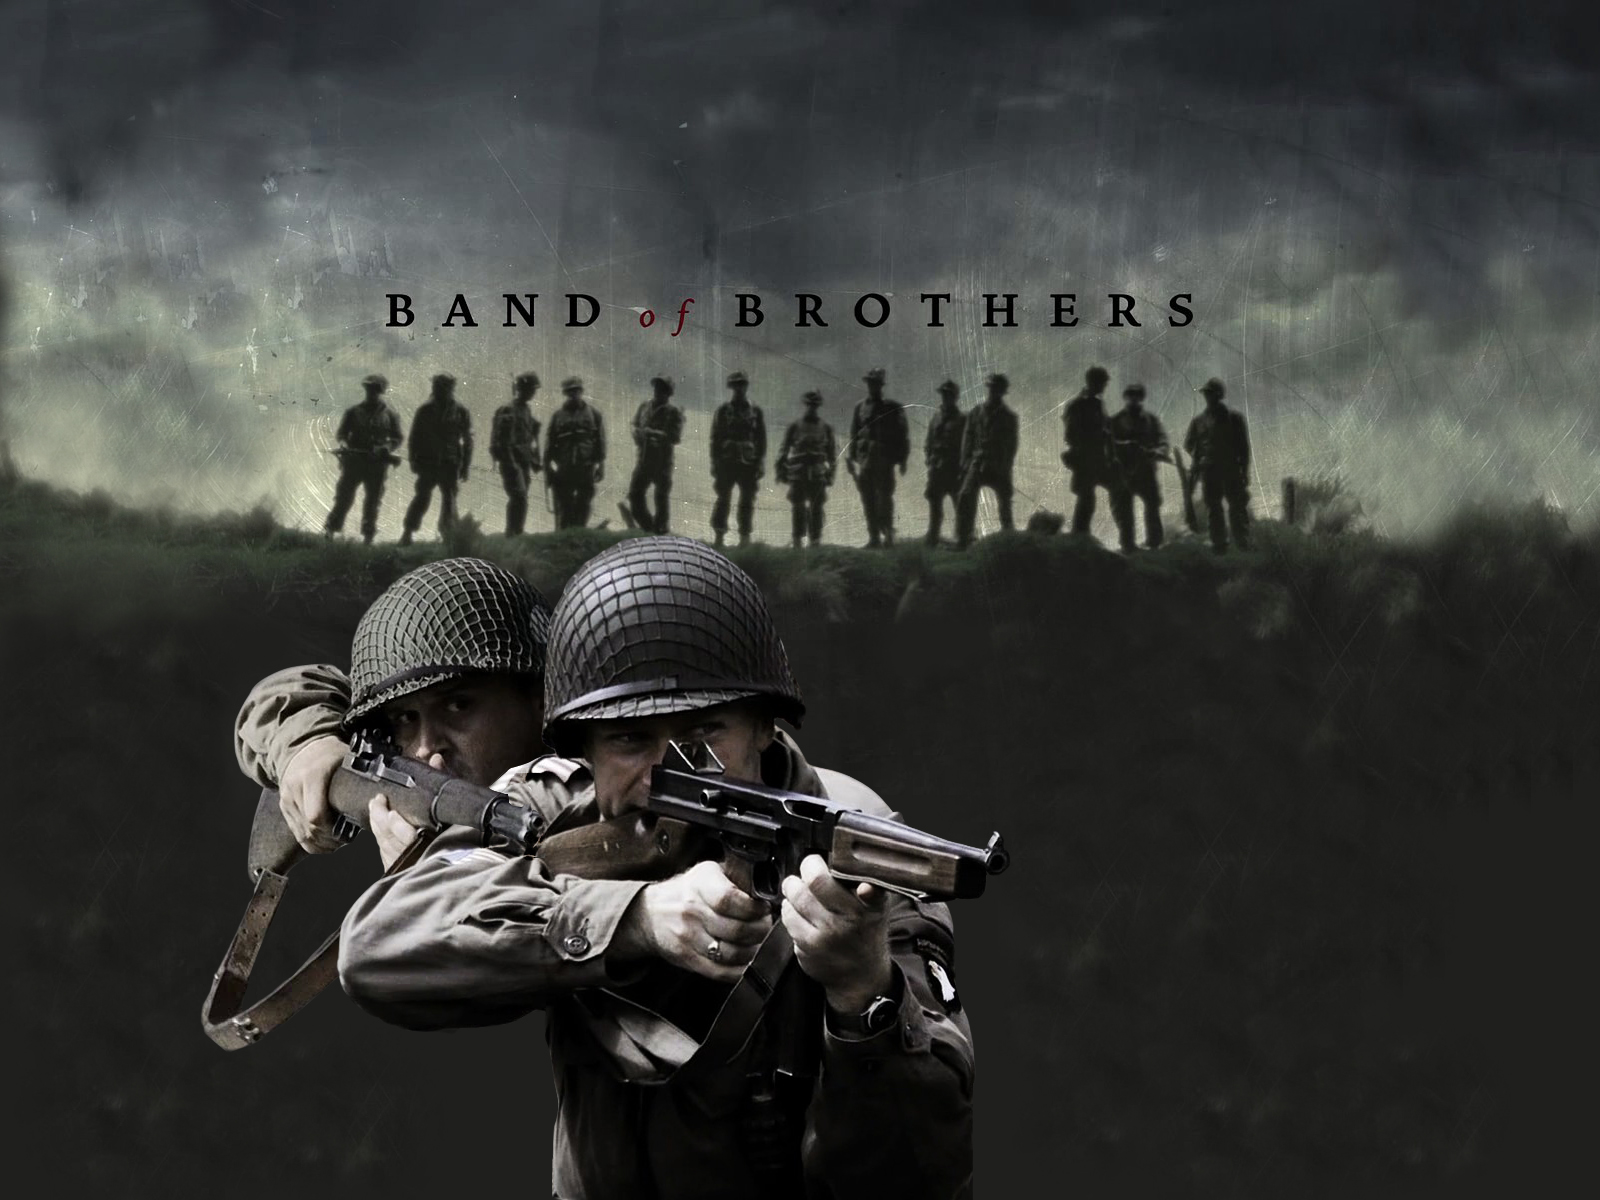 band of brothers wallpaper,movie,soldier,action adventure game,pc game,event